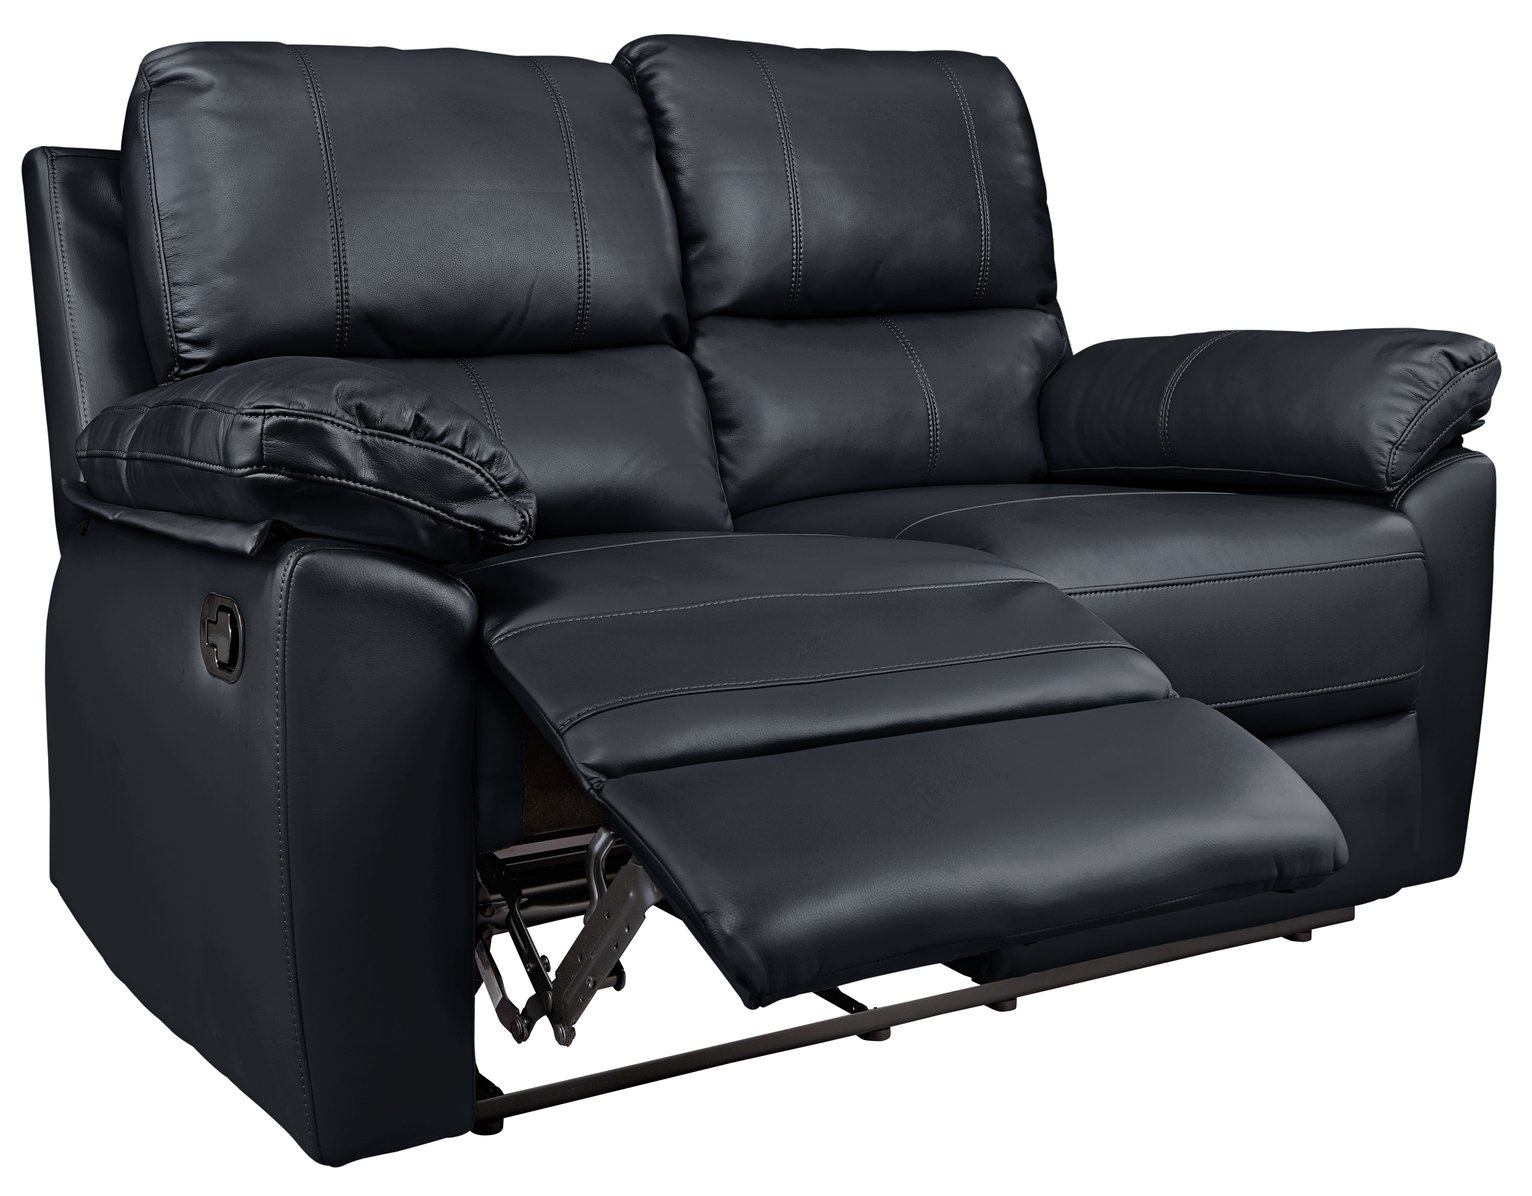 Argos Home Toby 2 Seater Faux Leather Recliner Sofa - Black